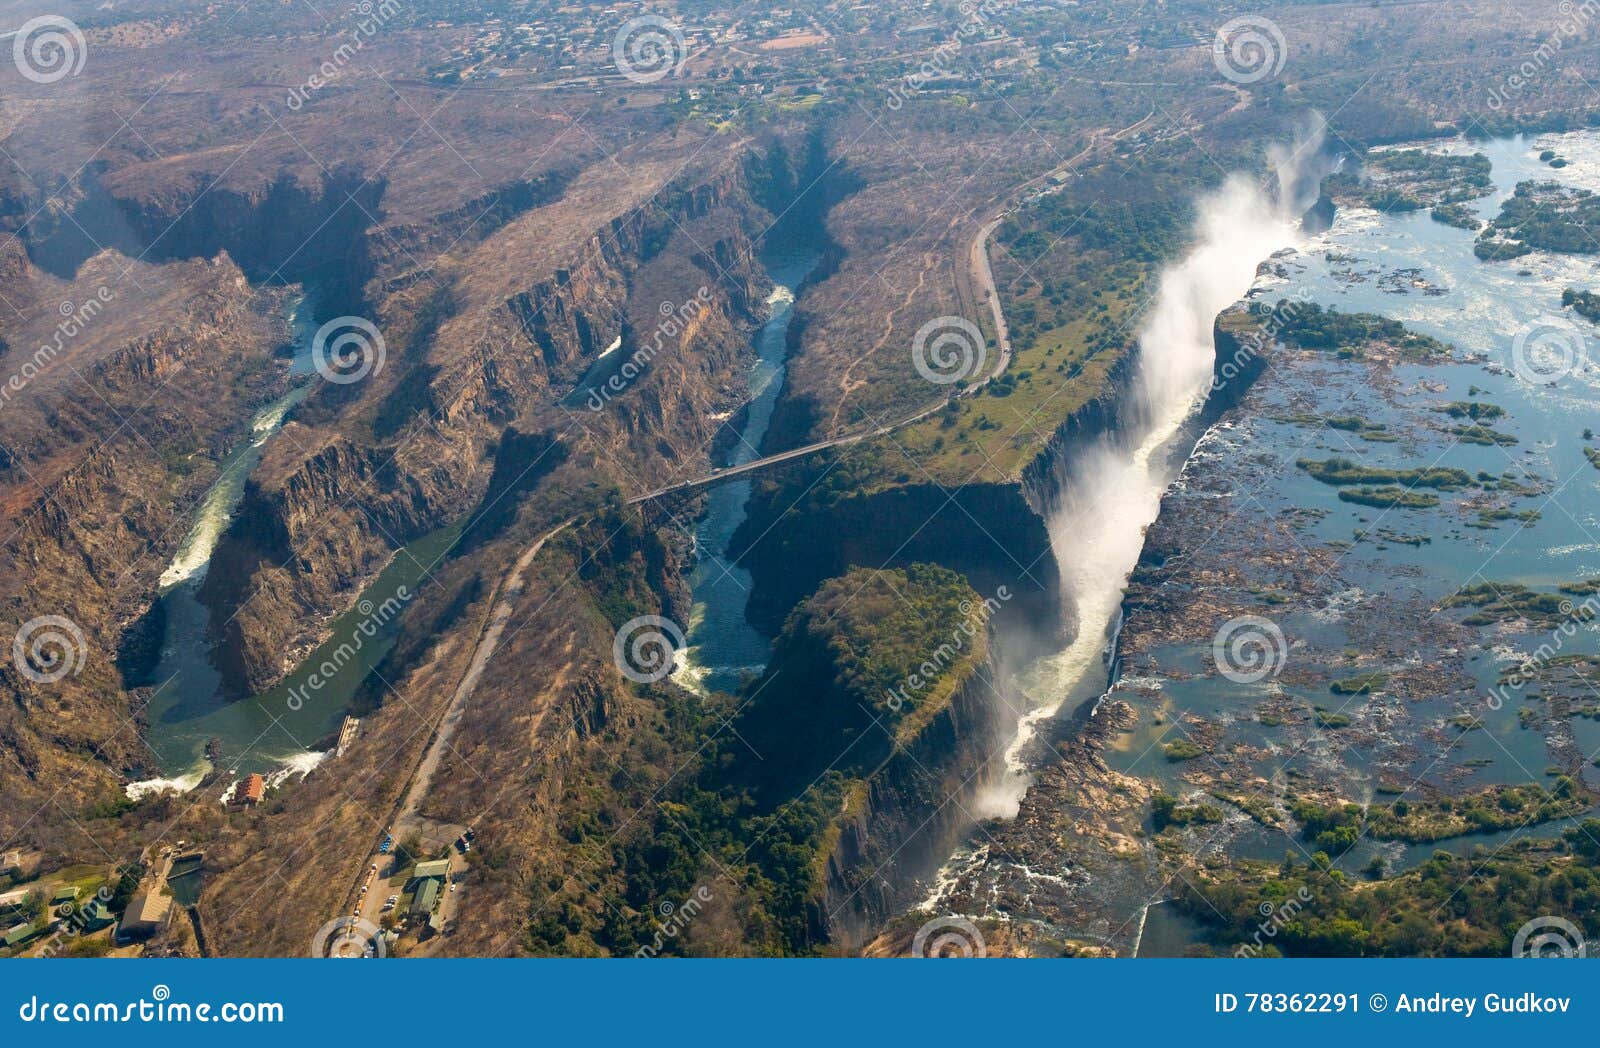 view of the falls from a height of bird flight. victoria falls. mosi-oa-tunya national park.zambiya. and world heritage site.